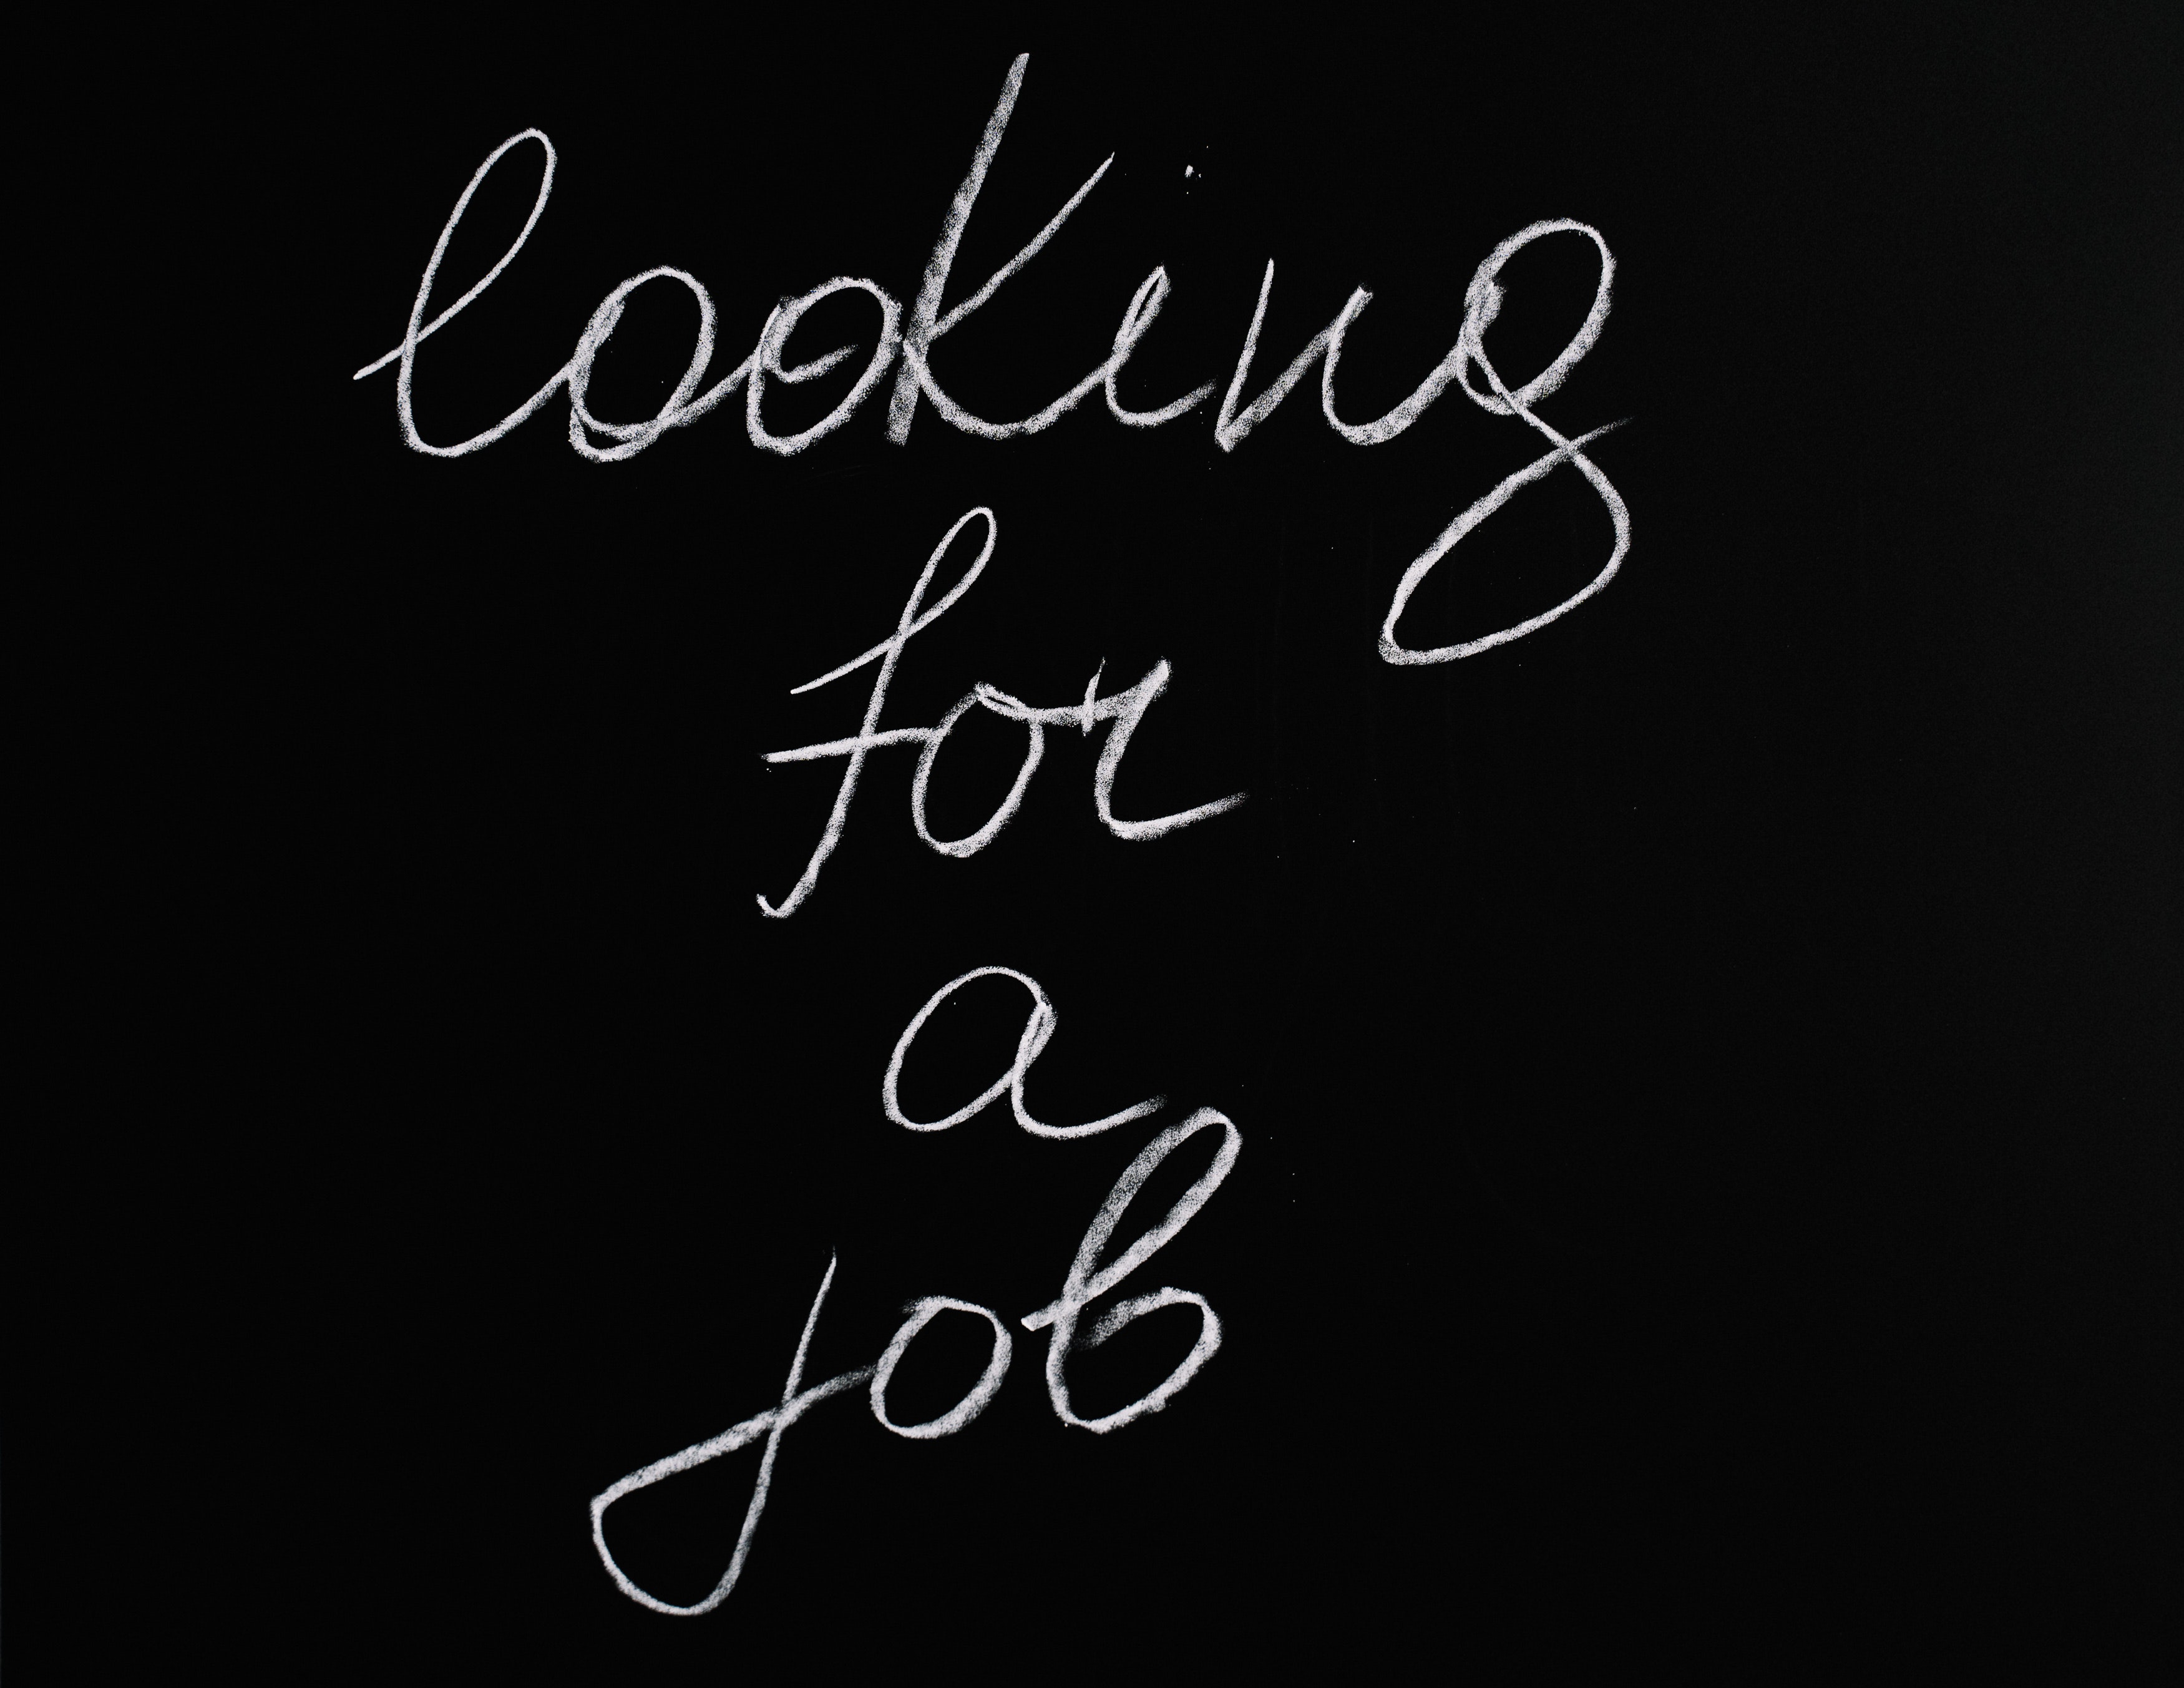 "looking-for-a-job" printed on chalkboard